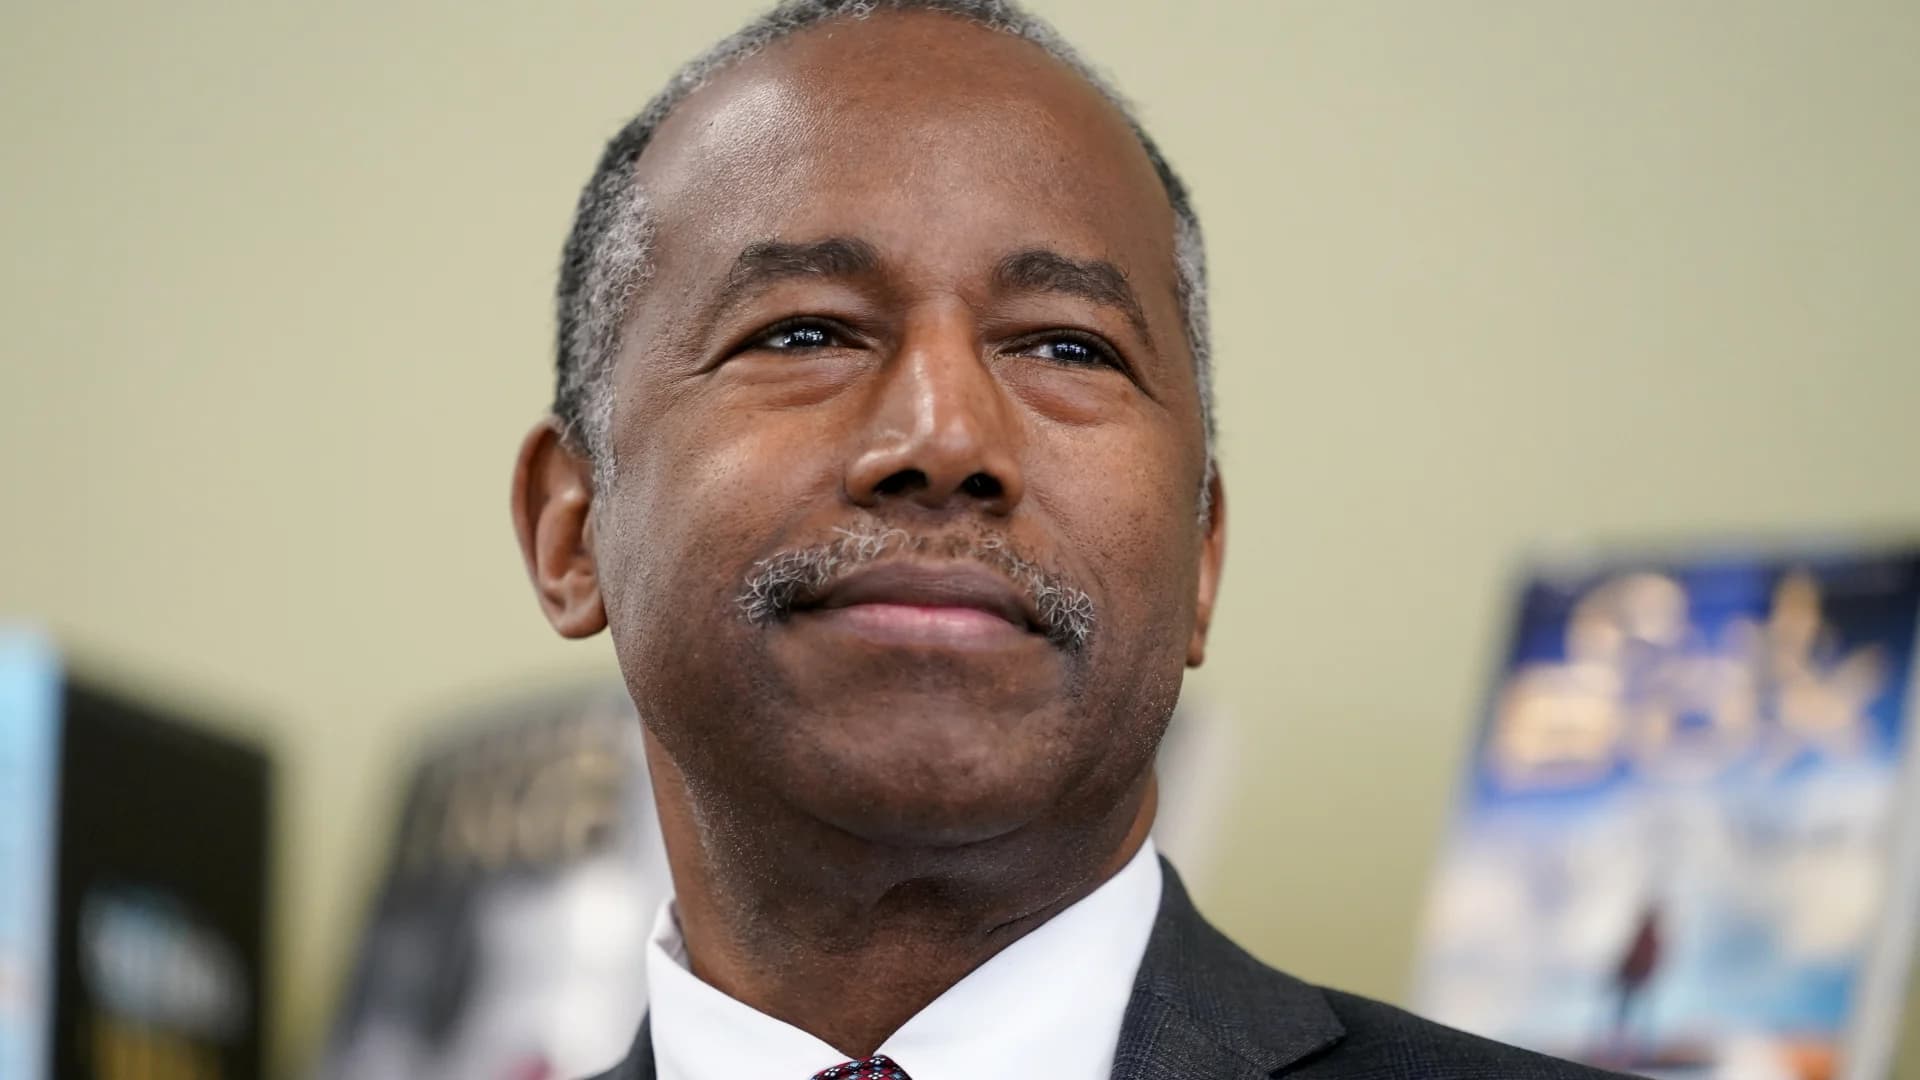 Ben Carson tests positive for COVID-19 after attending President Trump's election night party